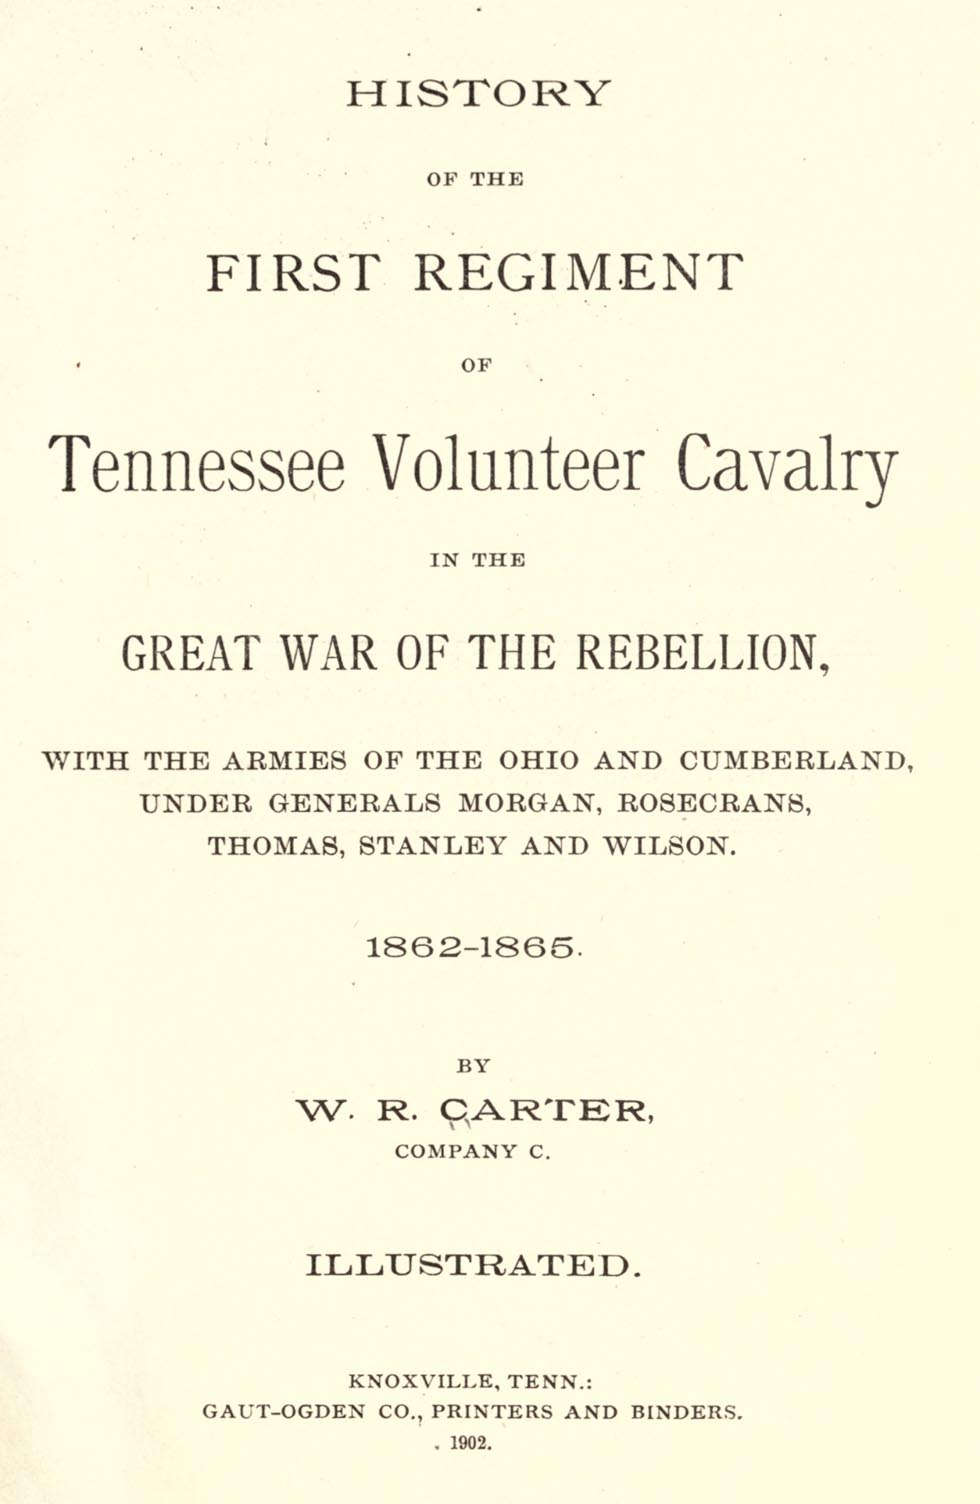 W R Carter book - History of the First Regiment of Volunteer Calvary